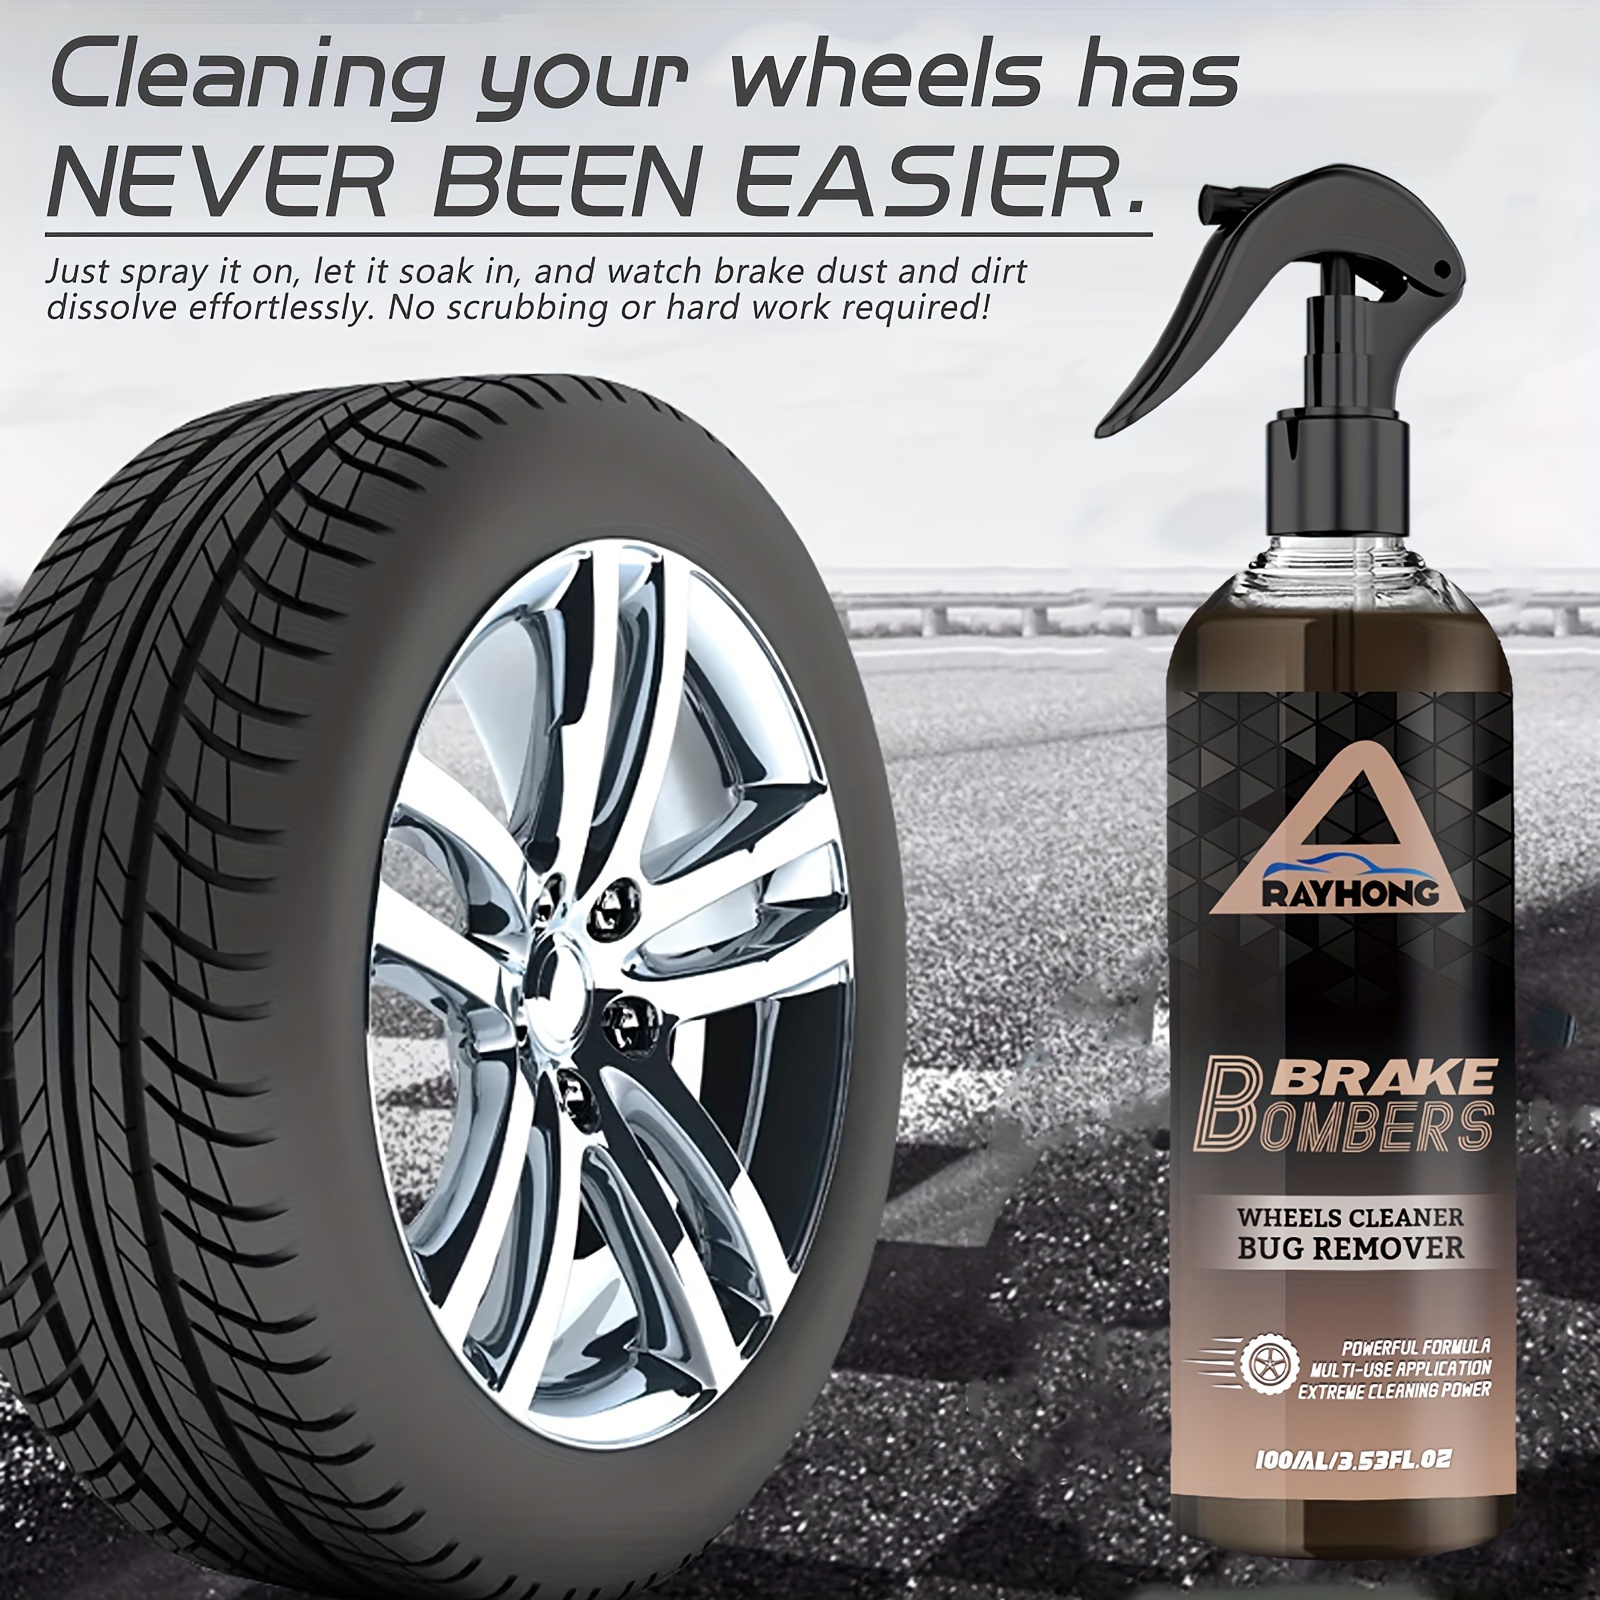 Stealth Garage Brake Bomber Non-Acid Wheel Cleaner, Perfect for Cleaning  Wheels